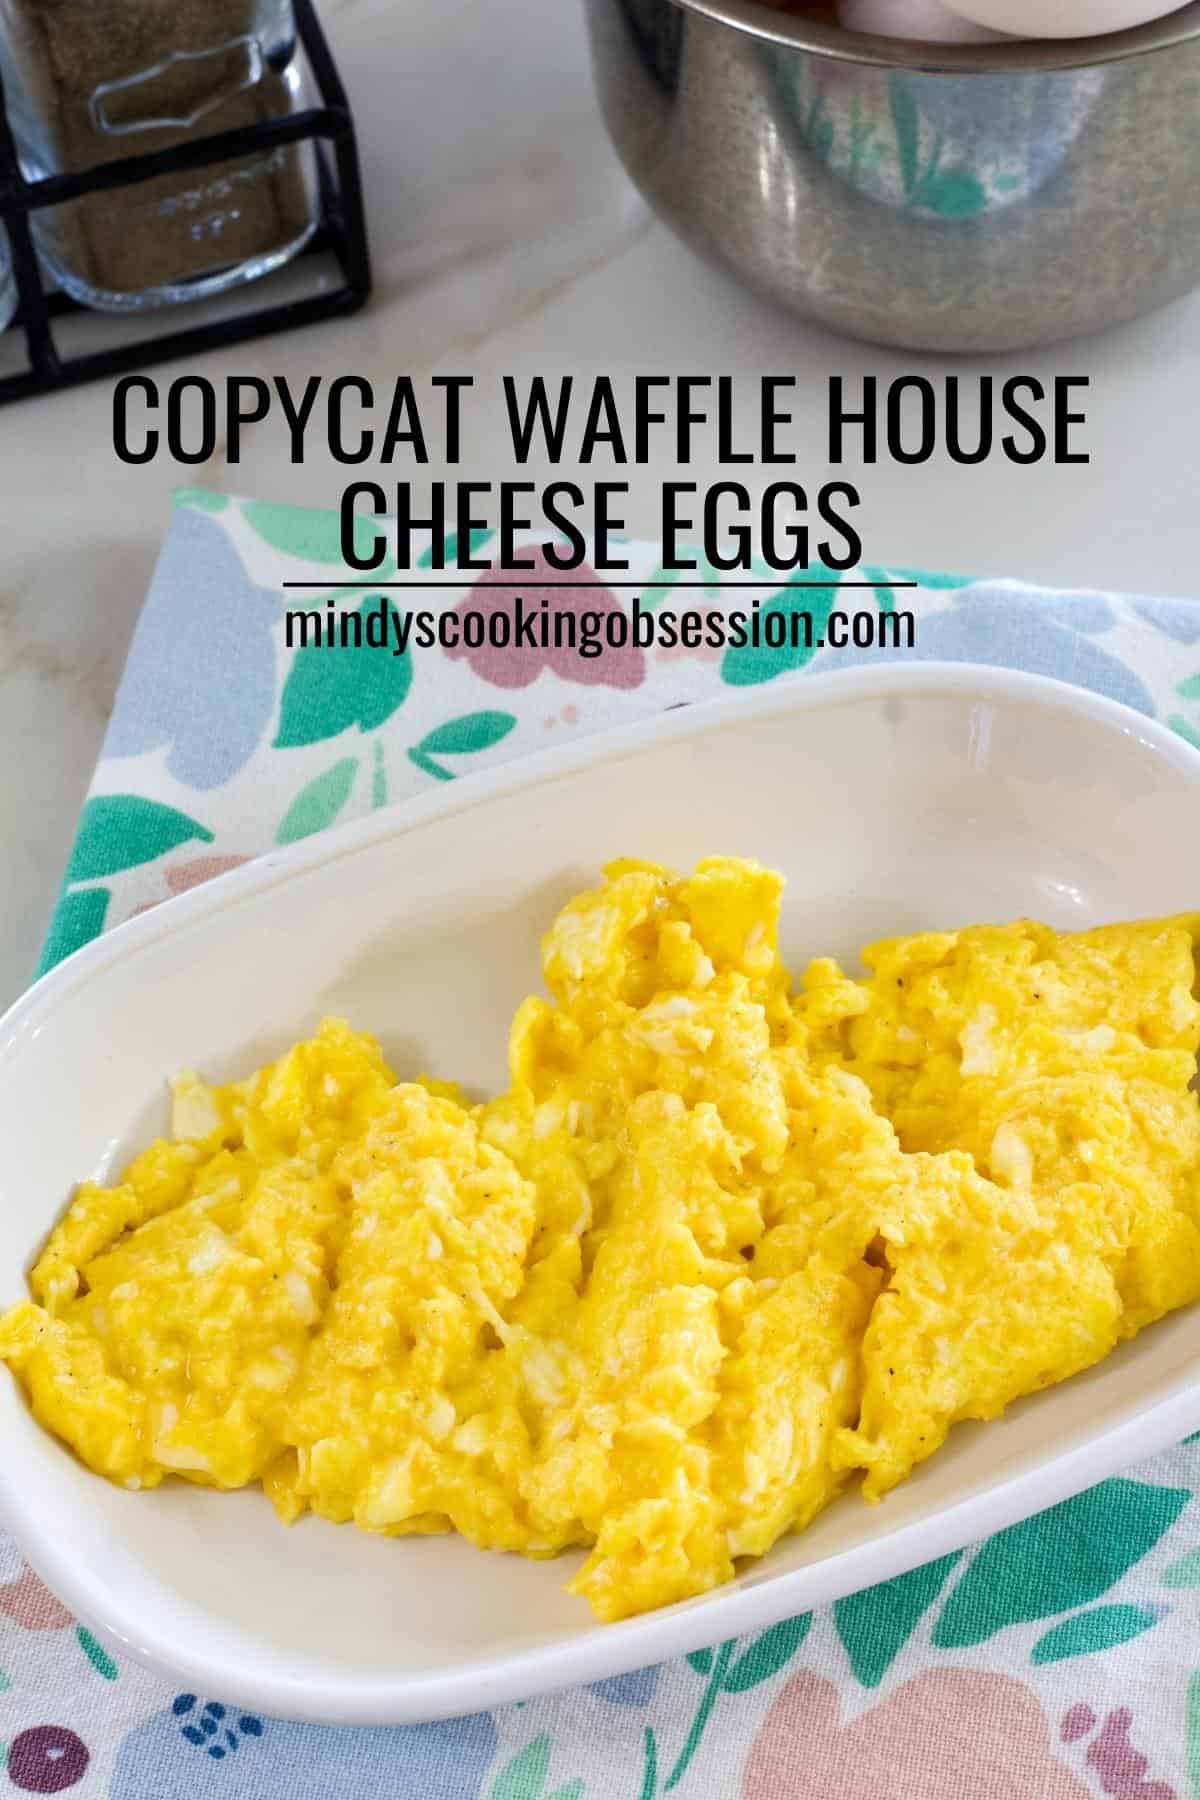 Perfect Copycat Waffle House Cheese Eggs Recipe - just 5 ingredients are all you need to make this cheesy restaurant favorite at home. via @mindyscookingobsession